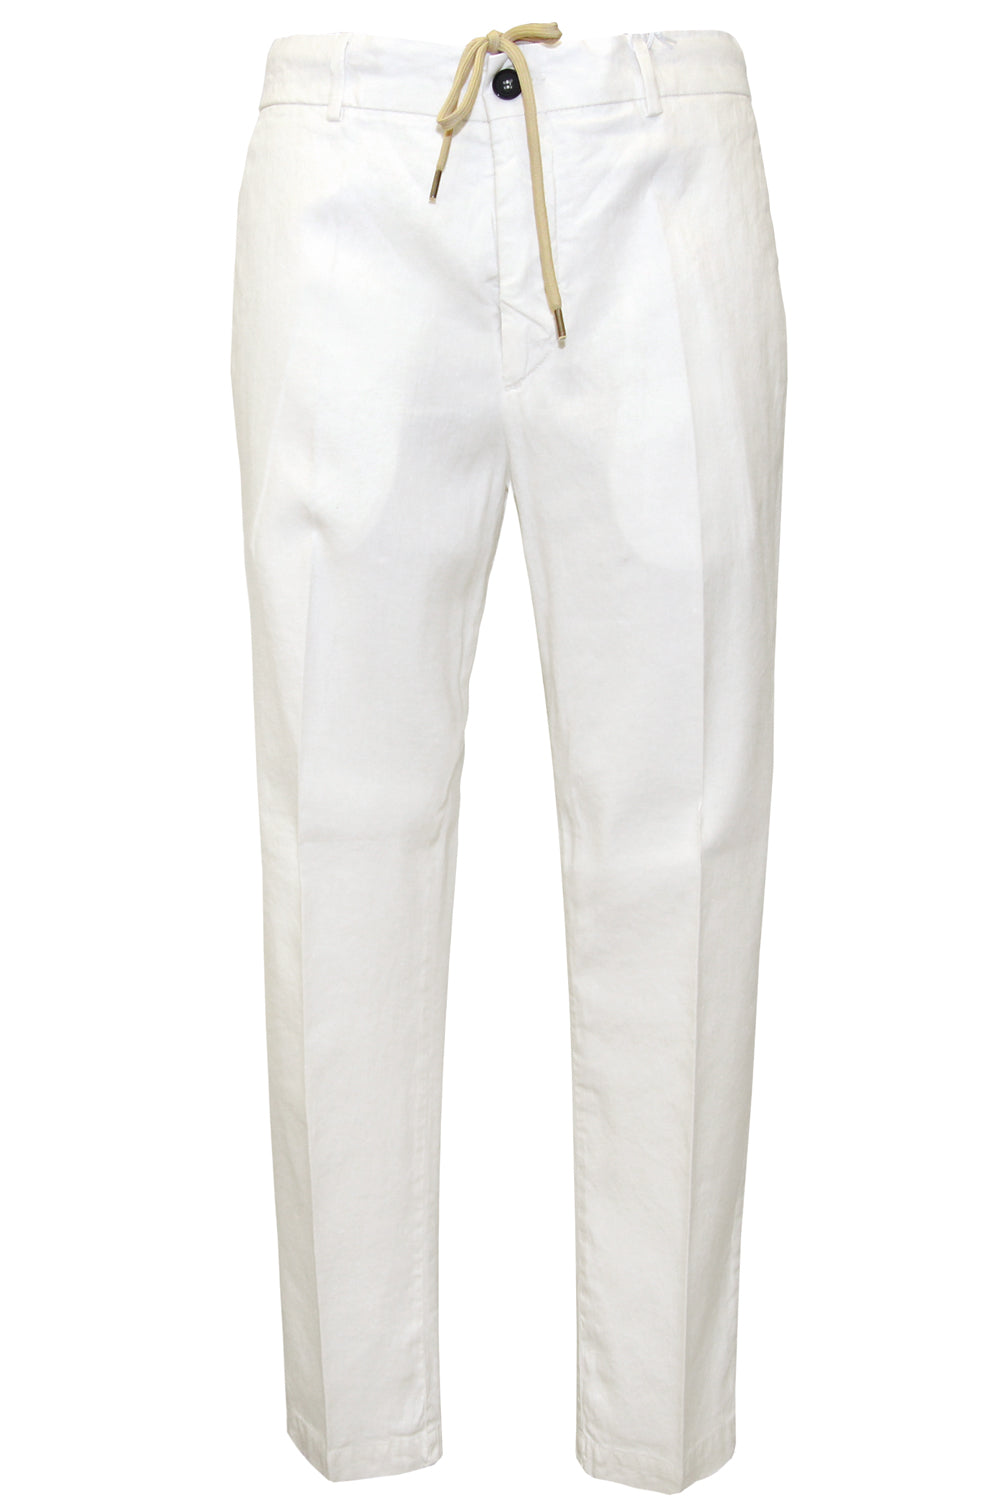 BE ABLE Pantalone Argo con coulisse